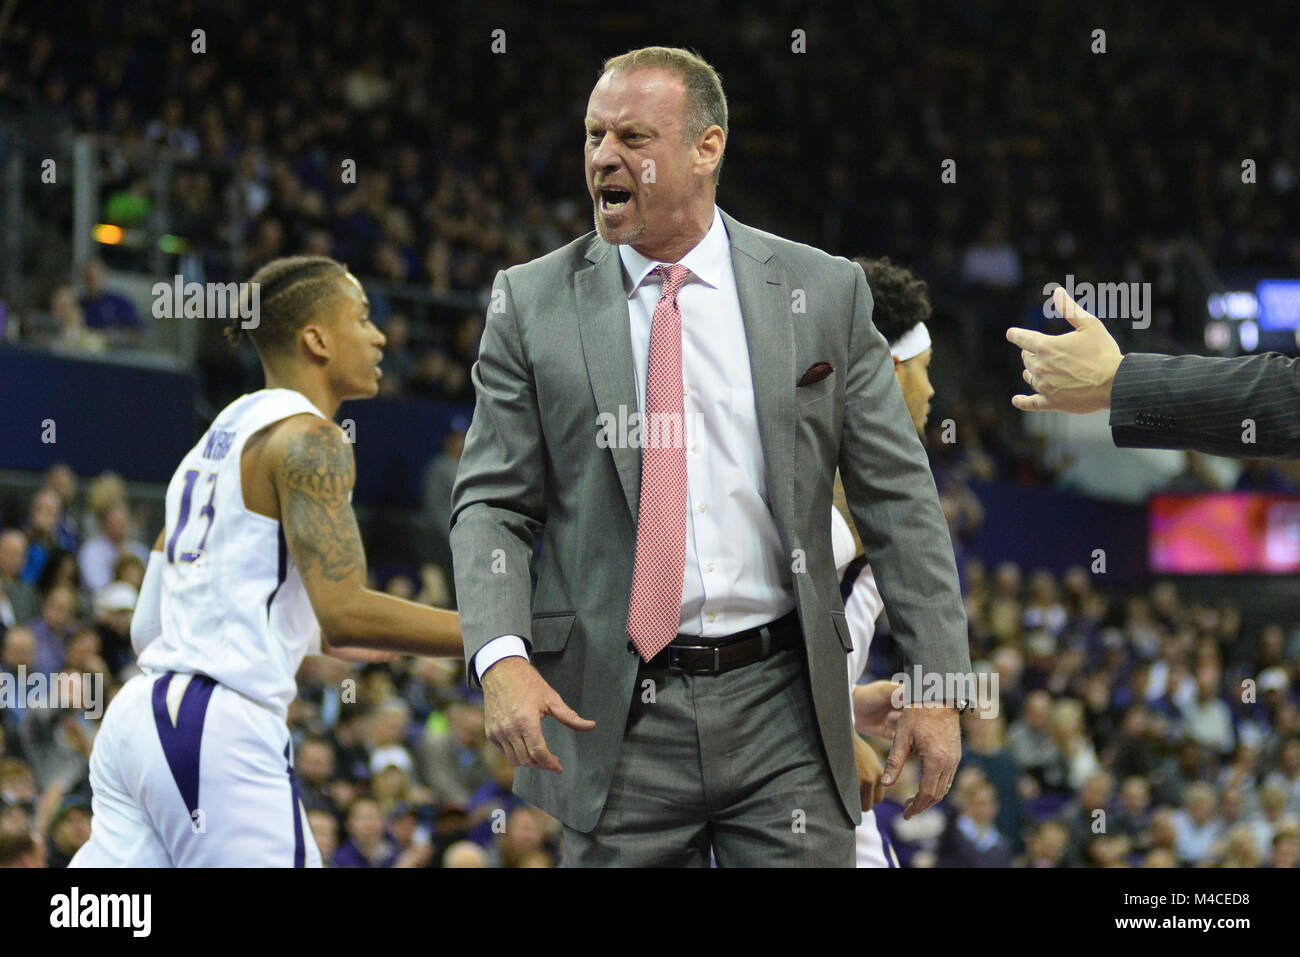 Seattle, WA, USA. 15th Feb, 2018. Utah Head Coach Larry Krystkowiak tries to get the referee's attention during a time out in a PAC12 basketball game between the University of Washington and the University of Utah. The game was played at Hec Ed Pavilion in Seattle, WA. Jeff Halstead/CSM/Alamy Live News Stock Photo